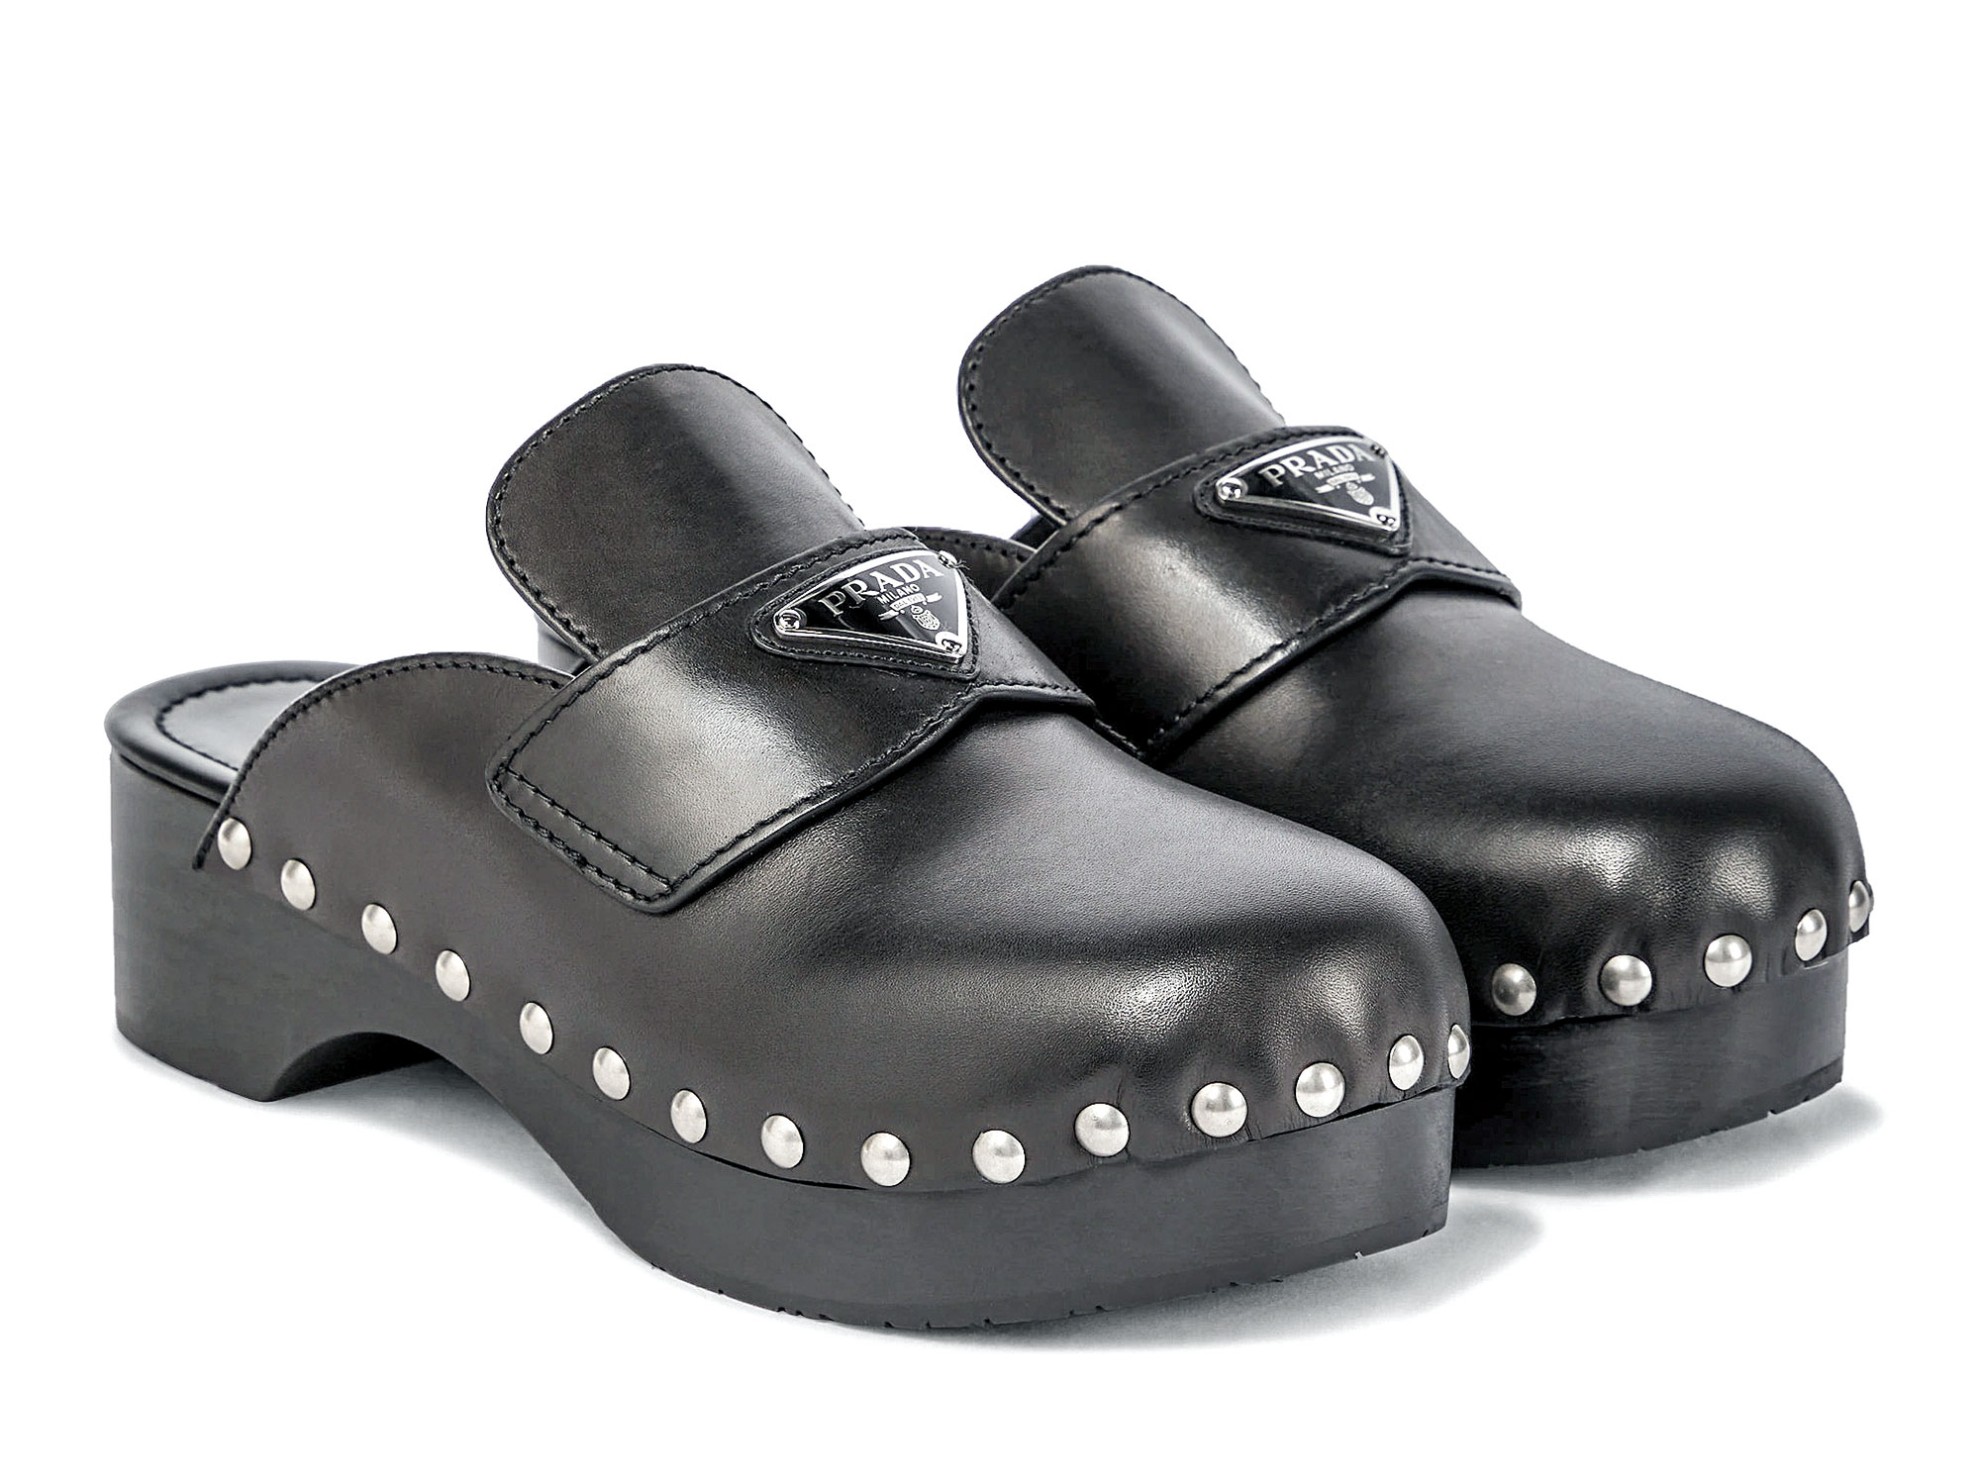 Fashion clogs: With distinguished materials